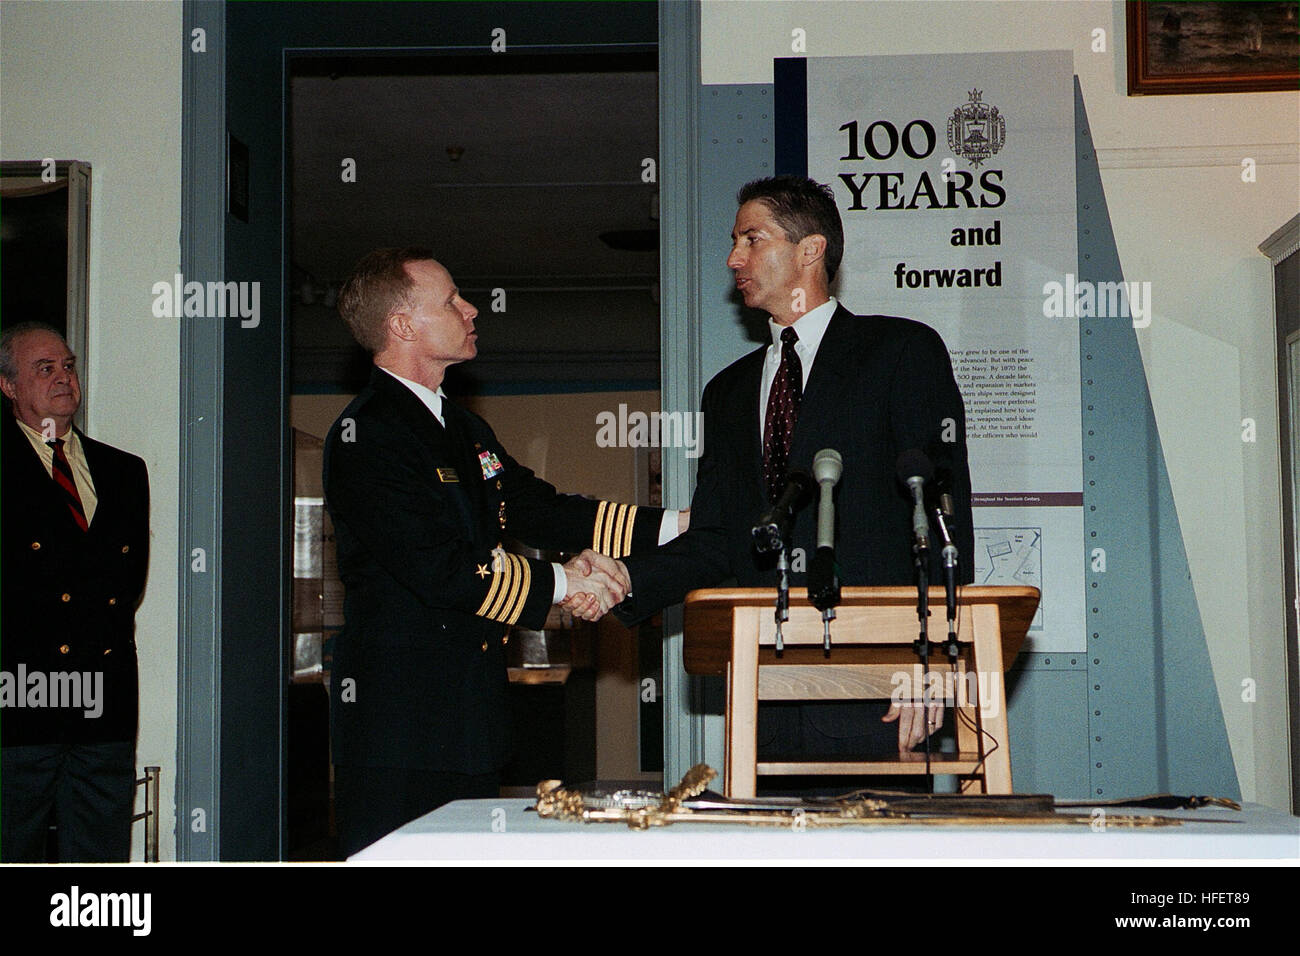 040112-N-0000X-002 Annapolis, Md. (Jan. 12, 2004) -- U.S. Naval Academy Commandant of Midshipmen Capt. Joe Leidig, left, shakes hands with Jeffrey A. Lampinski, Special Agent in Charge of the Philadelphia Division of the FBI during a ceremony to welcome the Worden Sword back to the Naval Academy,  missing since 1931. The Tiffany sword was originally presented to Rear Adm. John L. Worden by the state of New York for his command of USS Monitor in its famous battle with CSS Virginia in Hampton Roads, Va., and March 9, 1862.  Rear Adm. Worden also served as the seventh Superintendent of the U.S. N Stock Photo